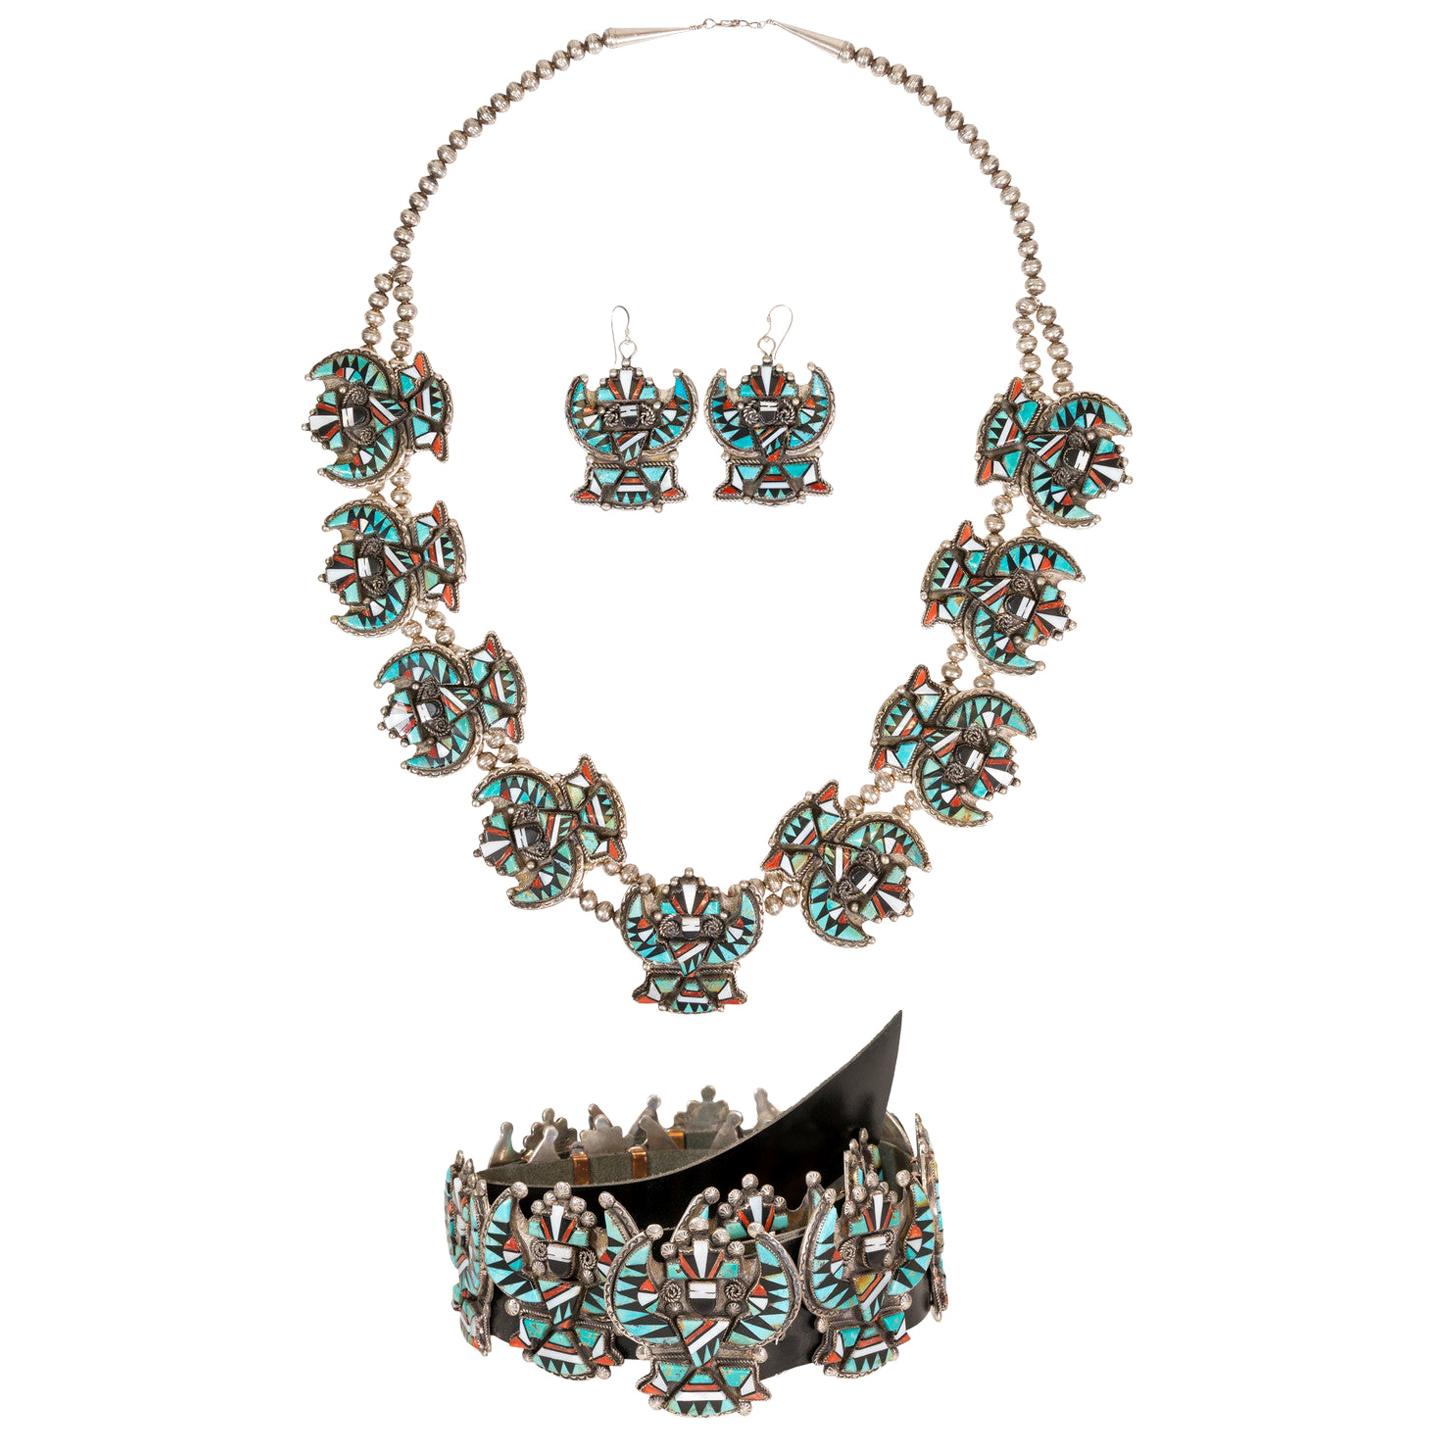 Stunning Zuni Inlaid Turquoise Concho Belt, Earrings and Necklace Set